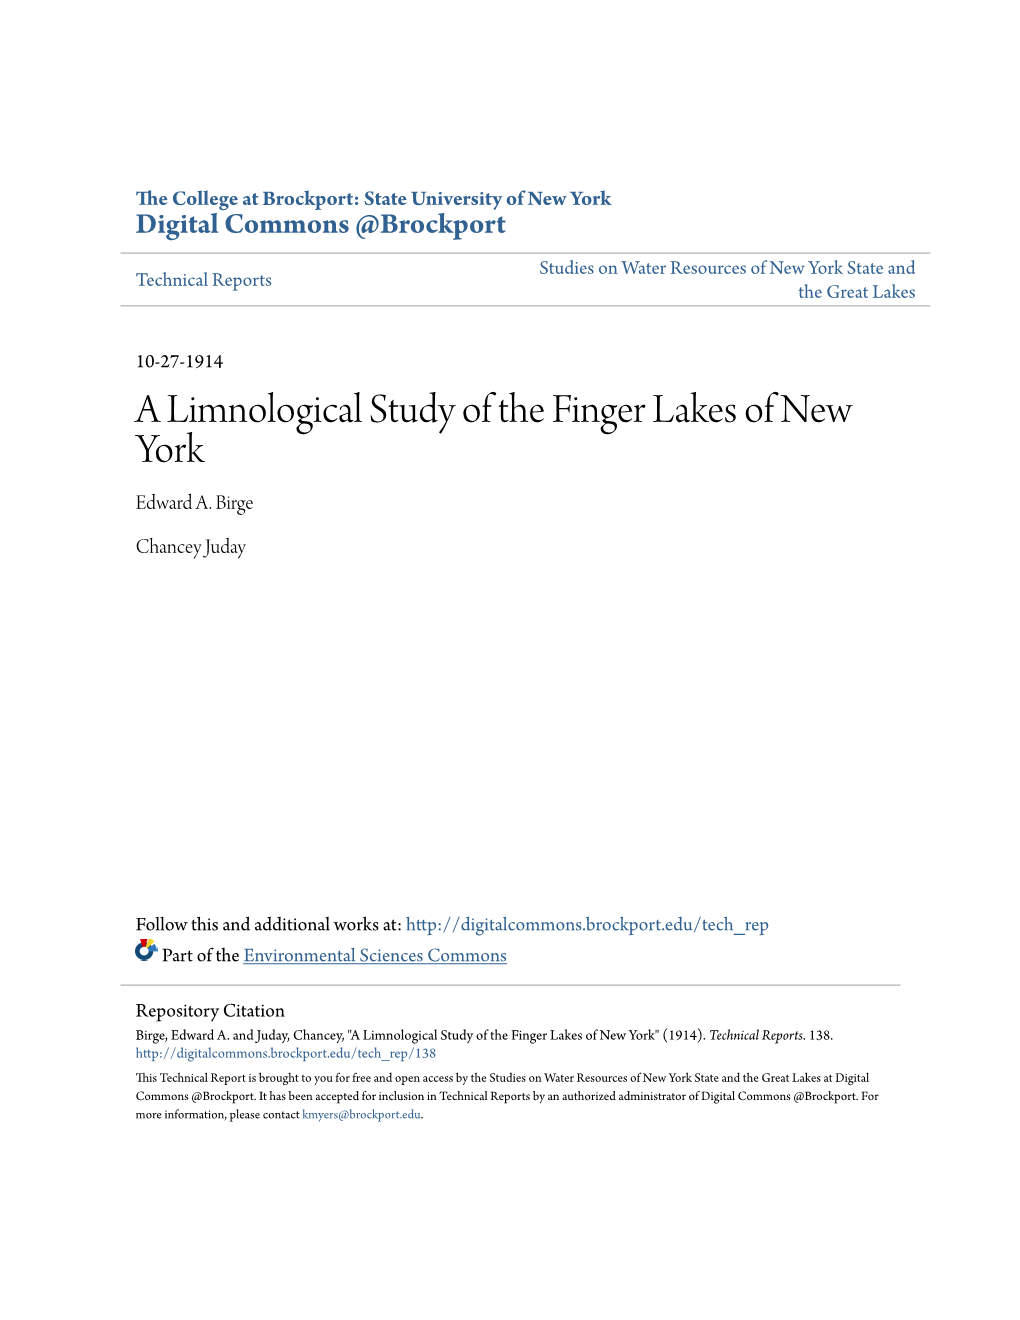 A Limnological Study of the Finger Lakes of New York Edward A